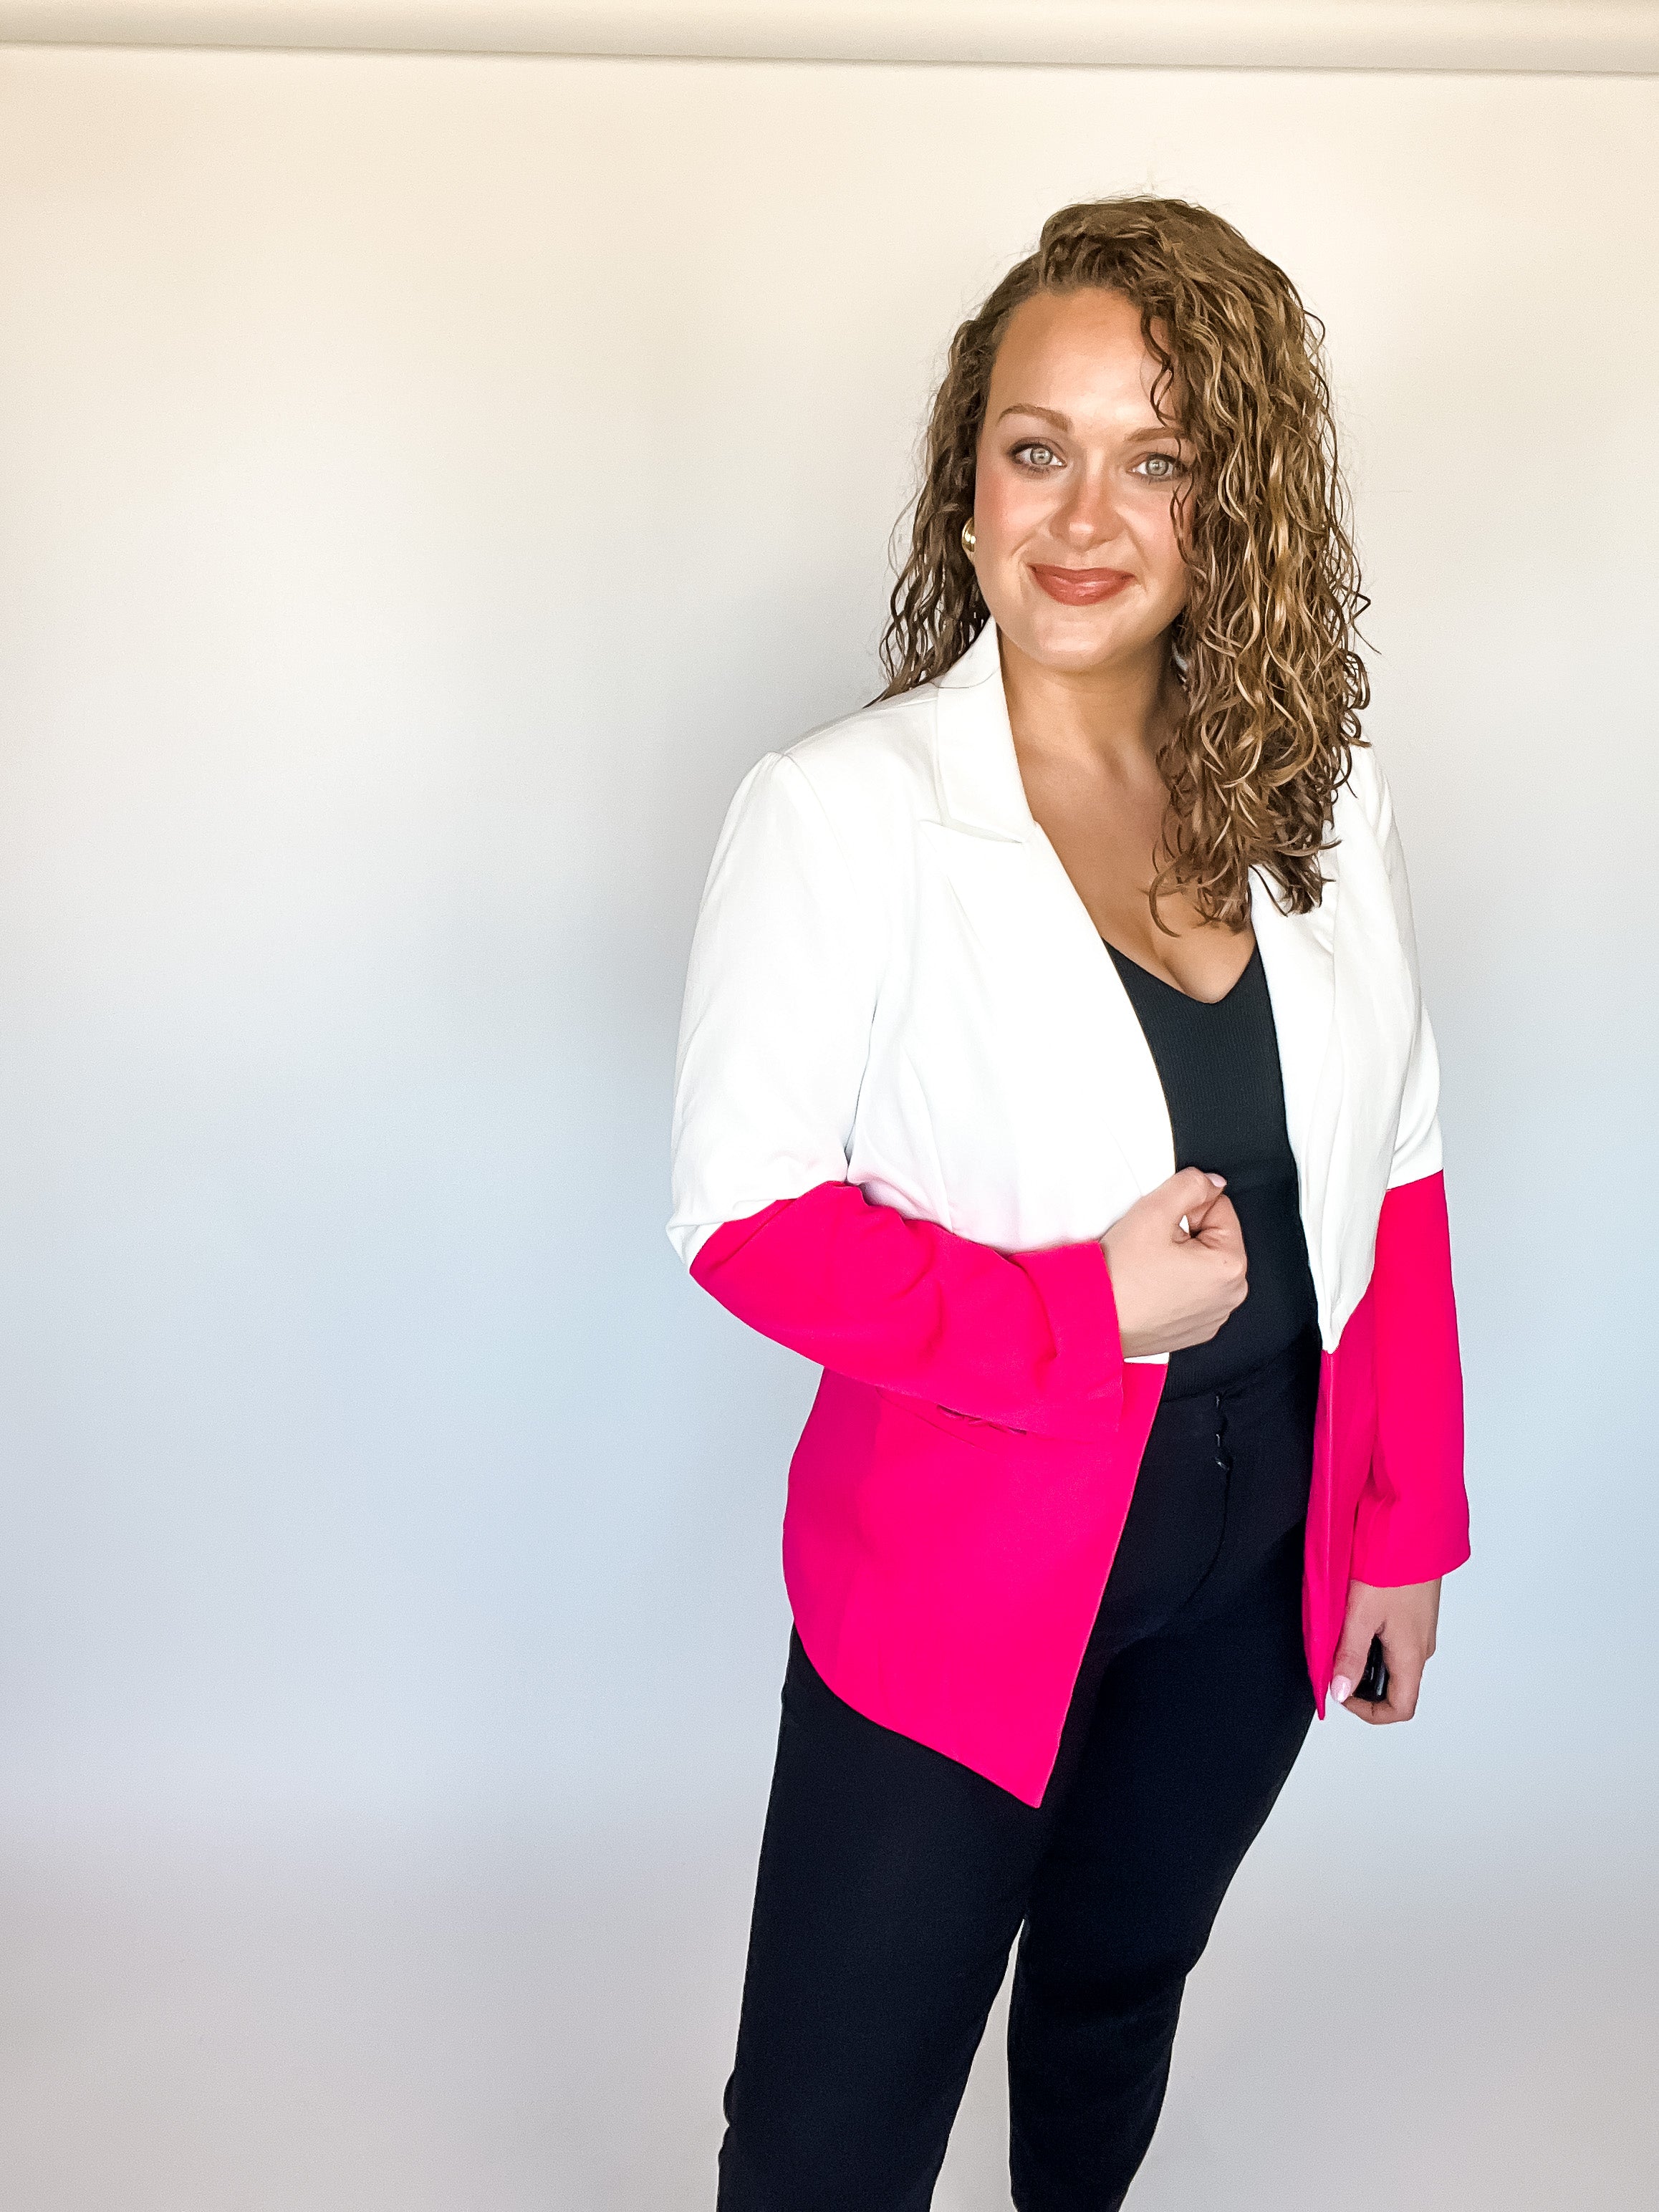 Hot Pink and White Two-Tone Blazer